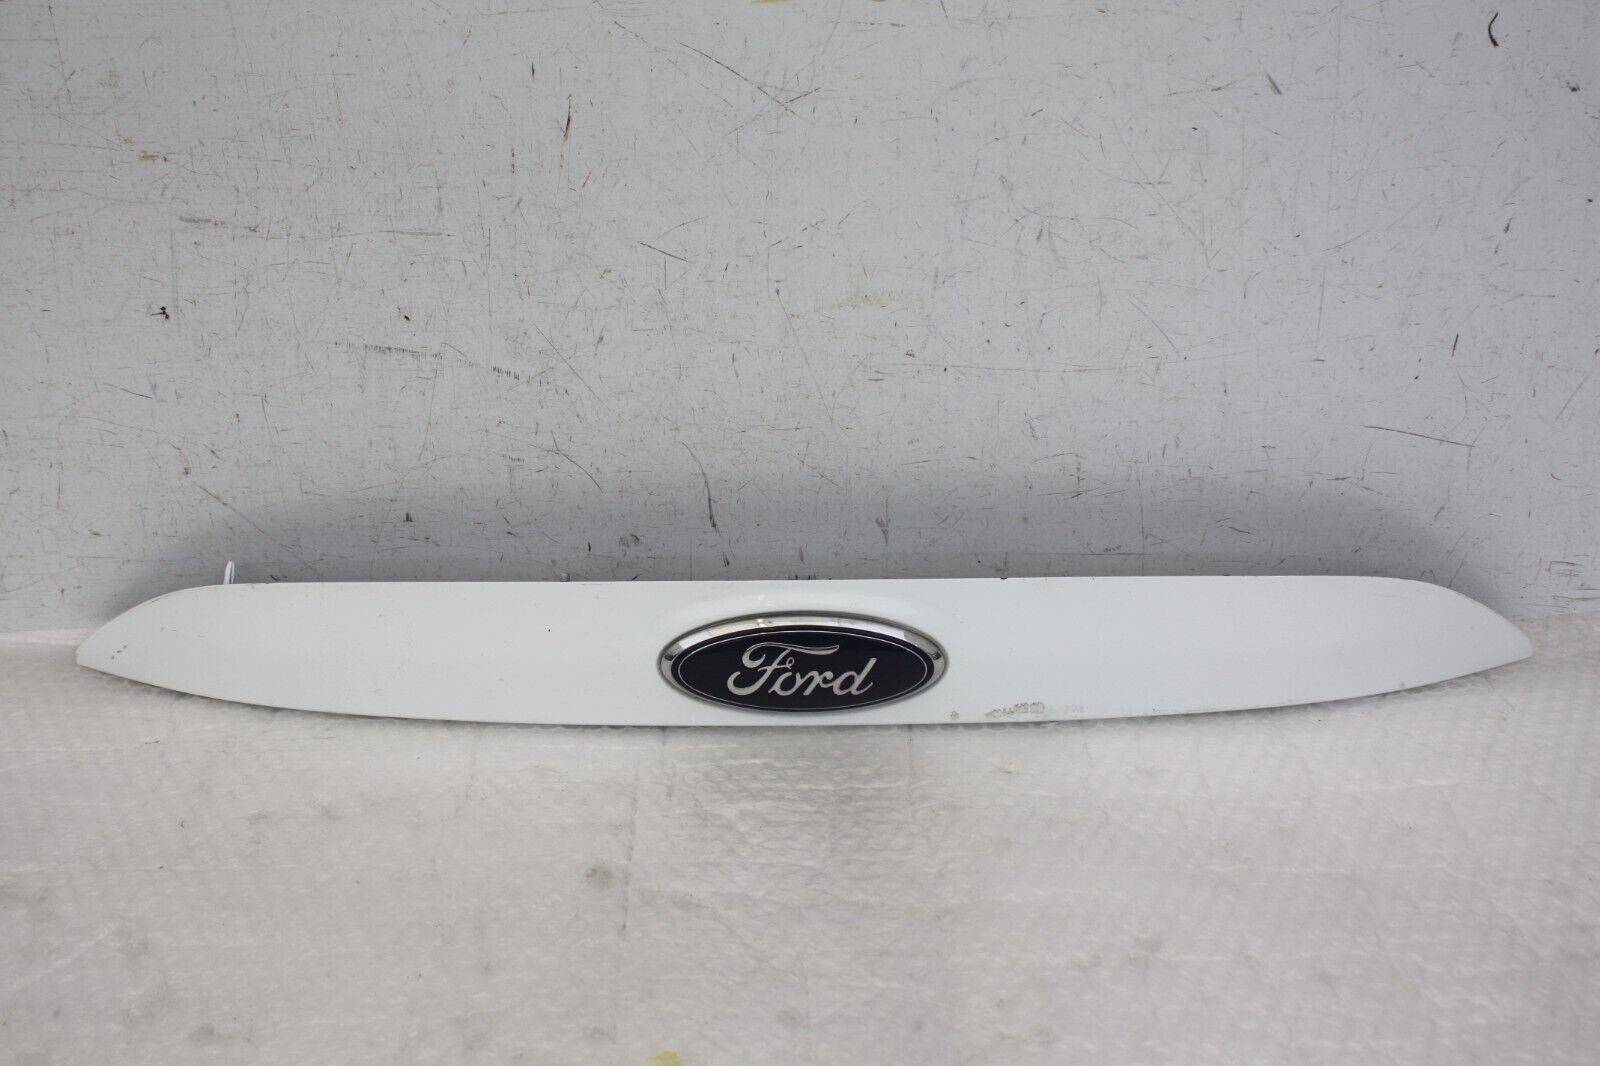 Ford Kuga Tailgate Trunk Boot Handle 2013 2016 CV44 S43404 AEW FIXING DAMAGED 176365204398